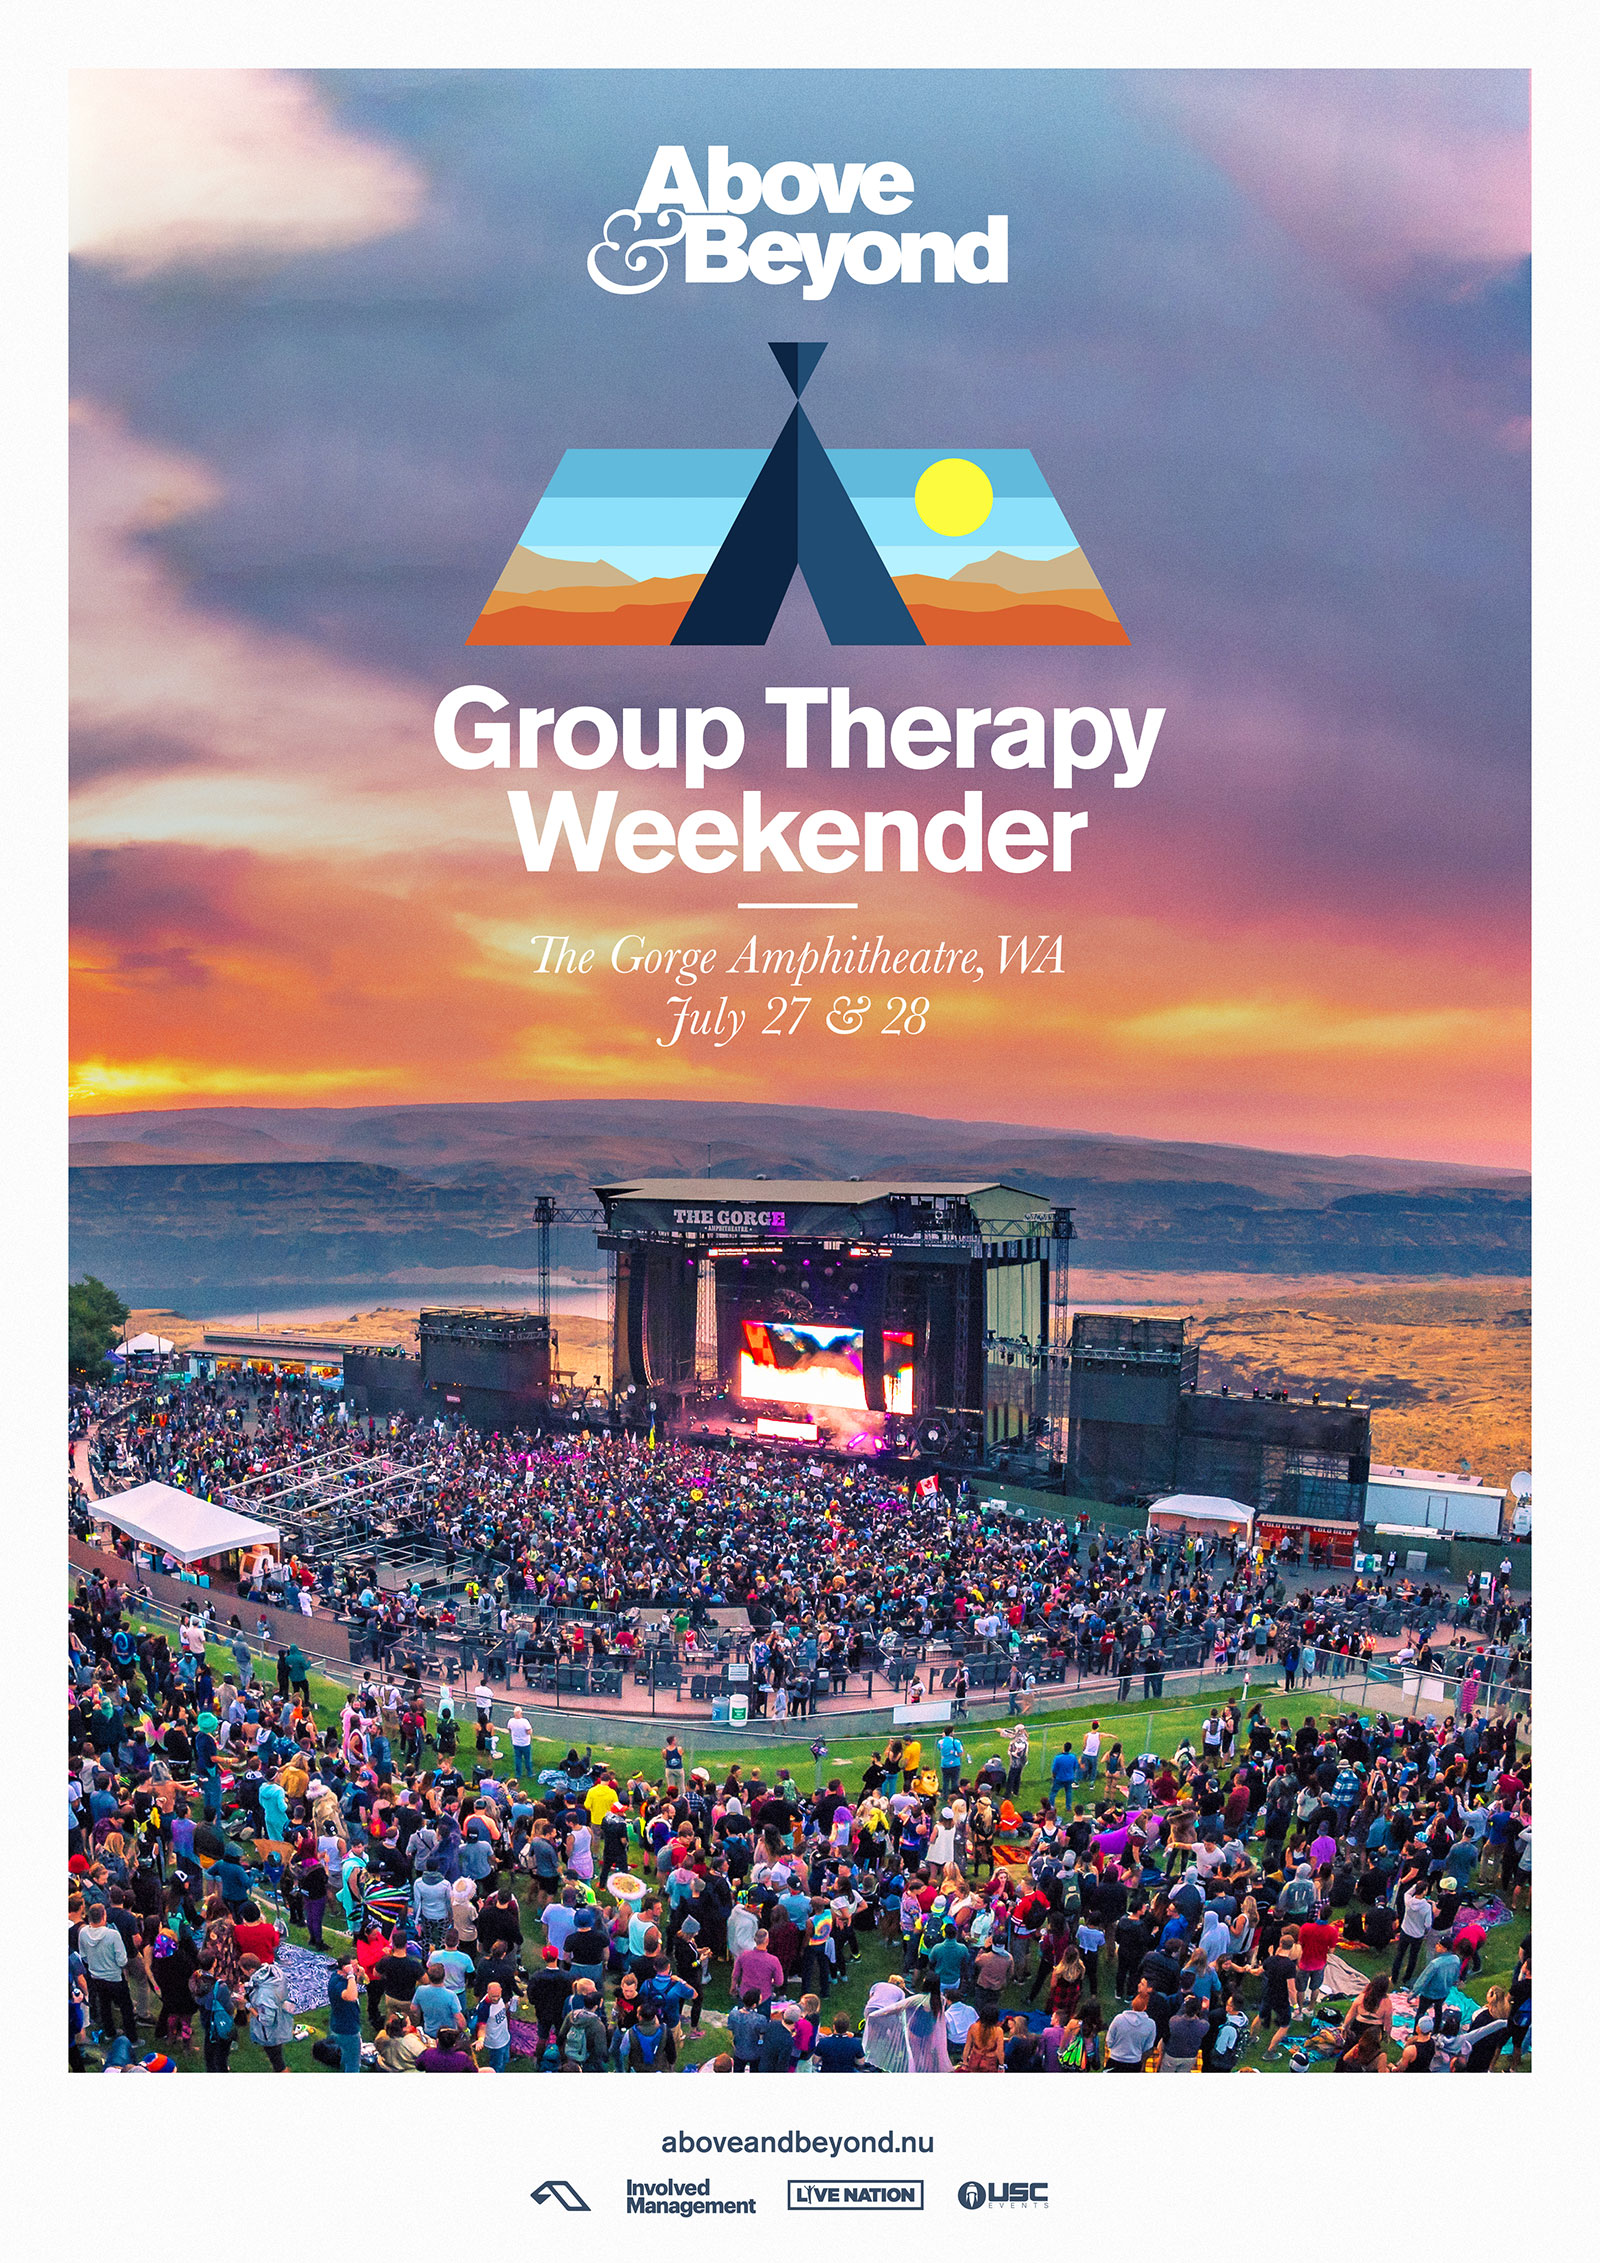 group-therapy-weekender-2019-above-and-beyond-oz-edm-flyer